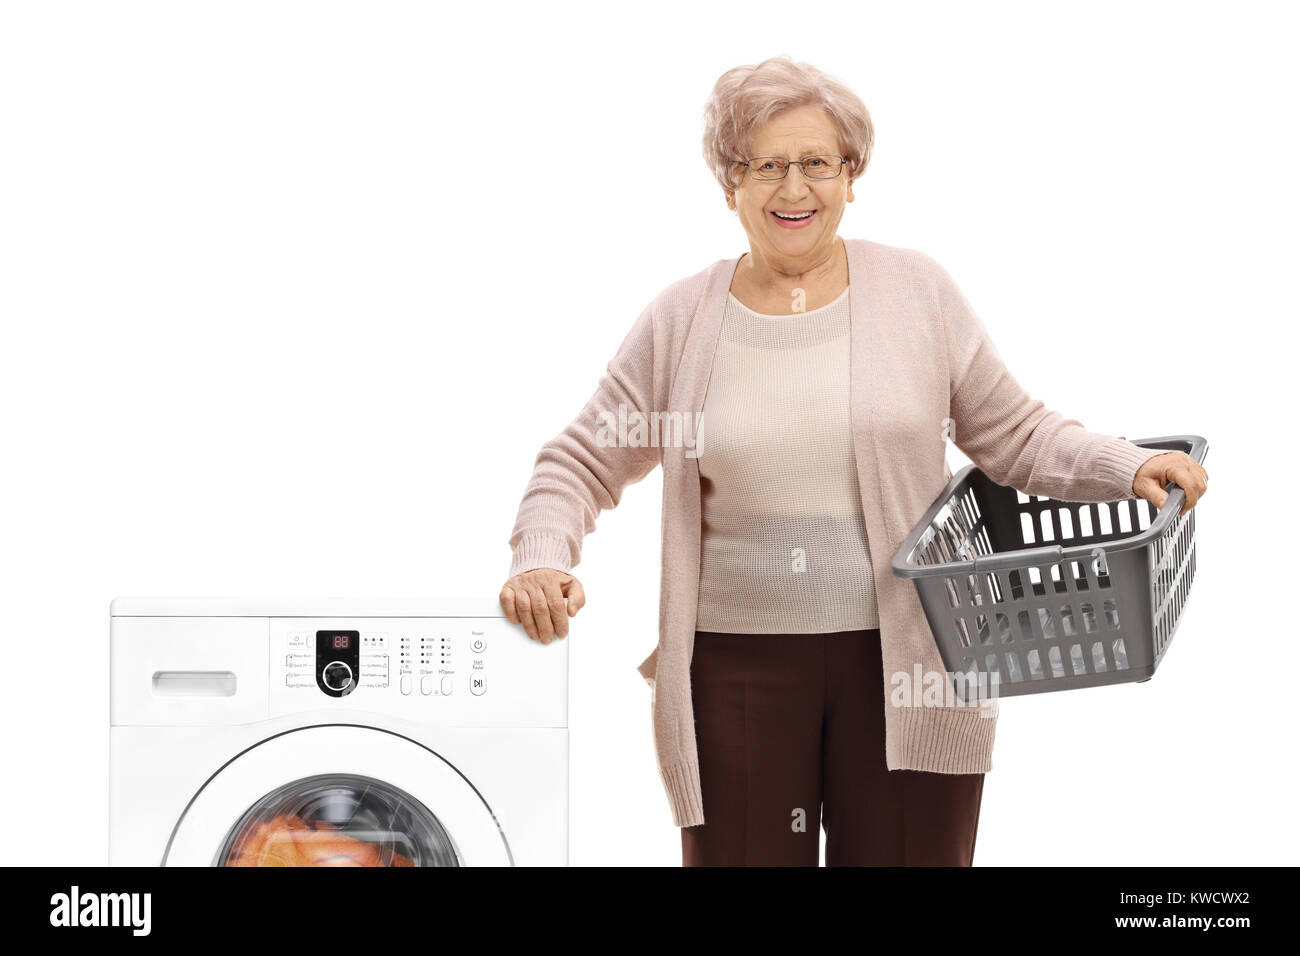 Elderly woman with an empty laundry basket next to a washing machine isolated on white background Stock Photo